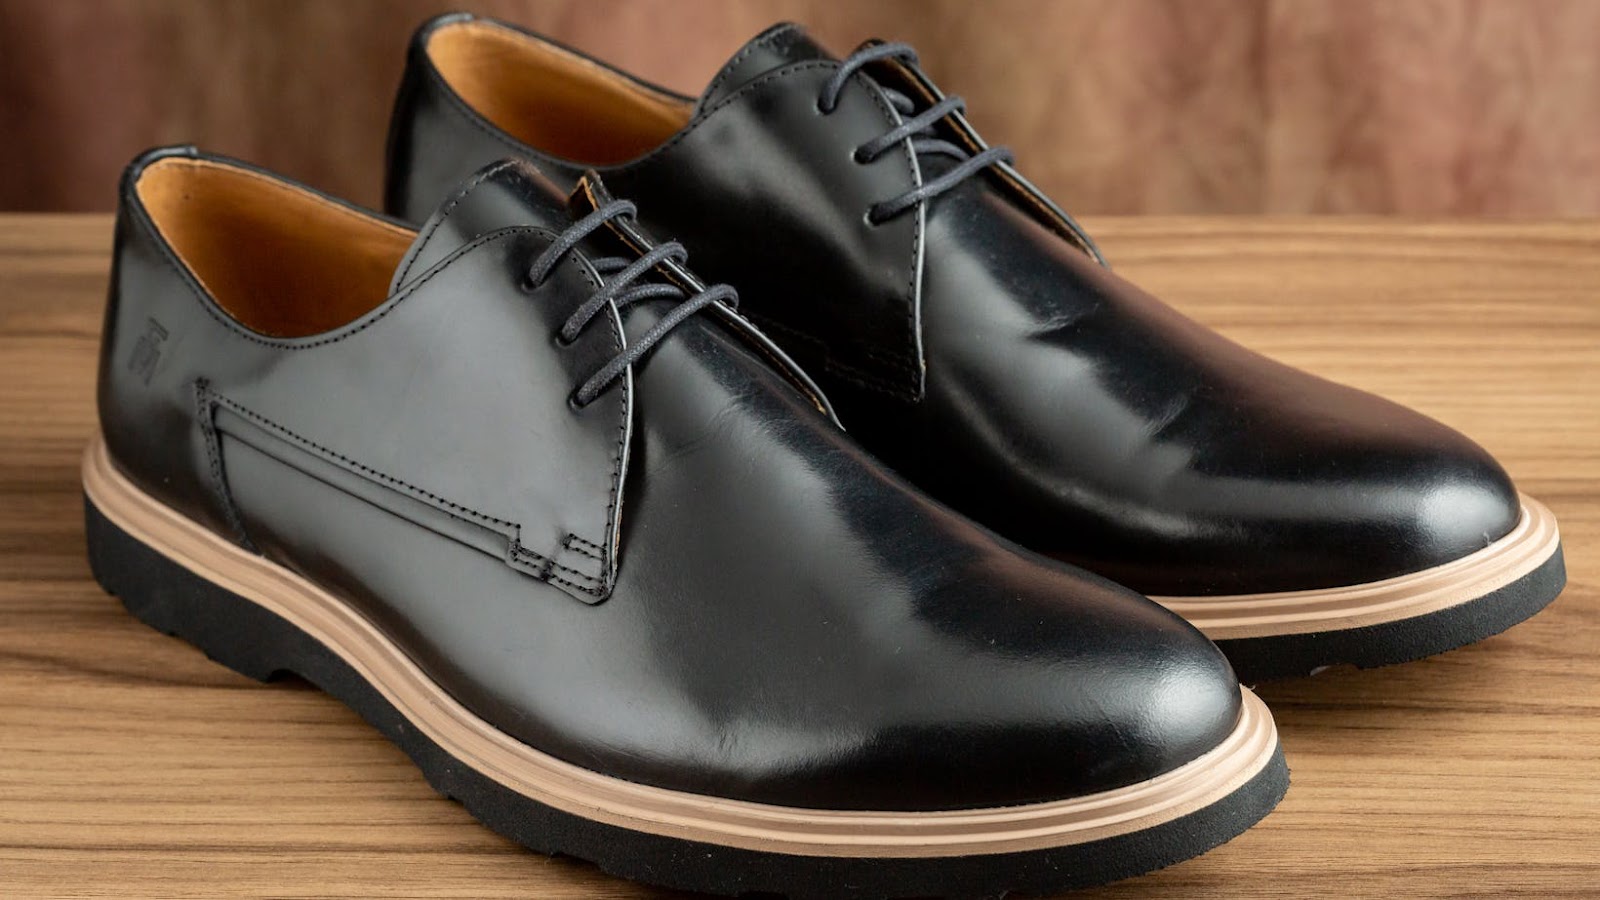 Discovering ECCO Men’s Dress Shoes: The Perfect Blend of Style, Comfort, and Sustainability